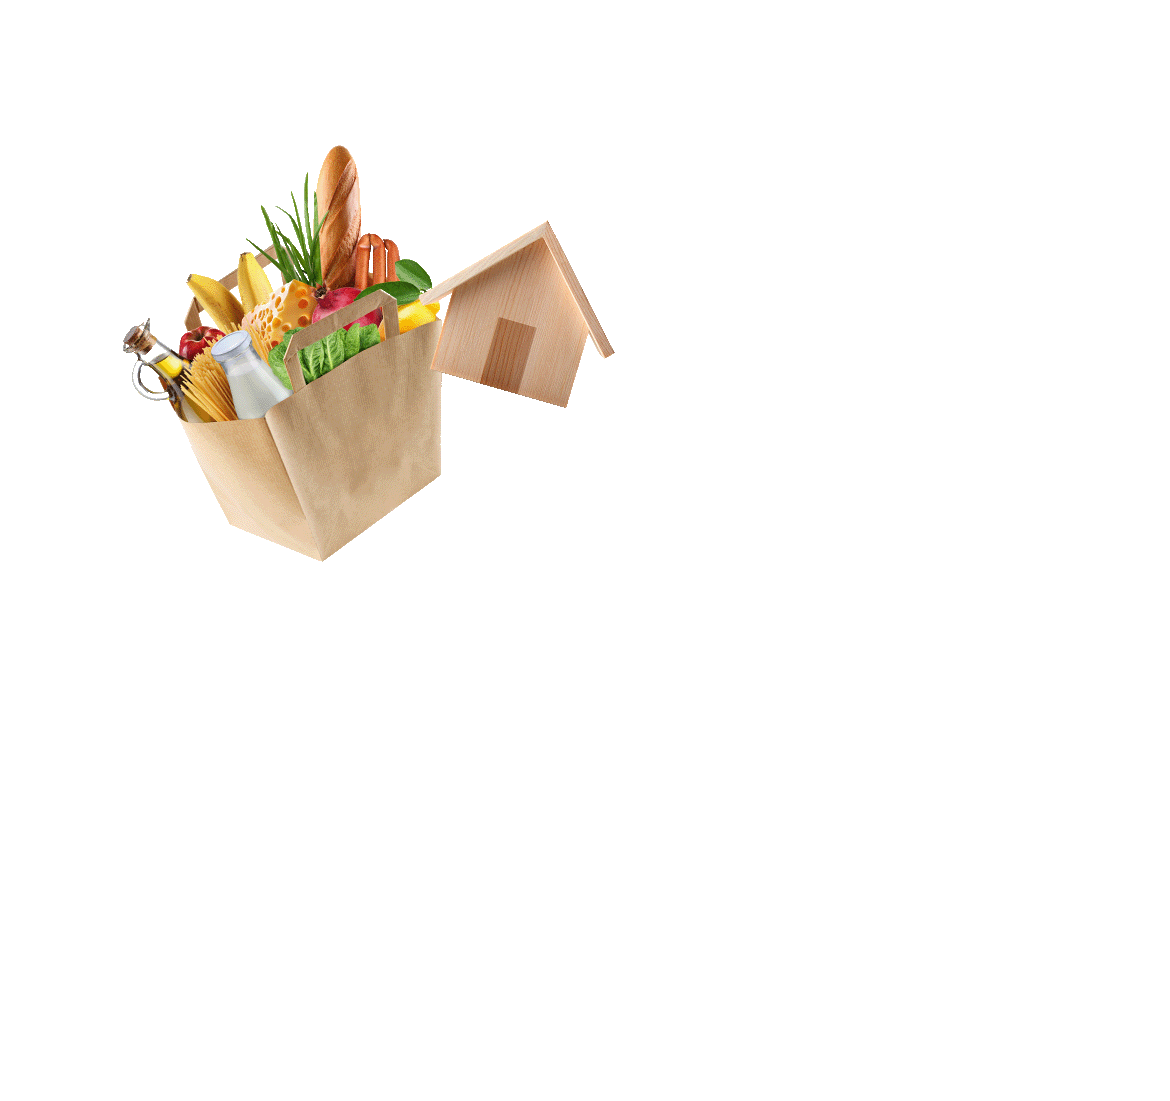 A bag of groceries and a simple wooden house model.